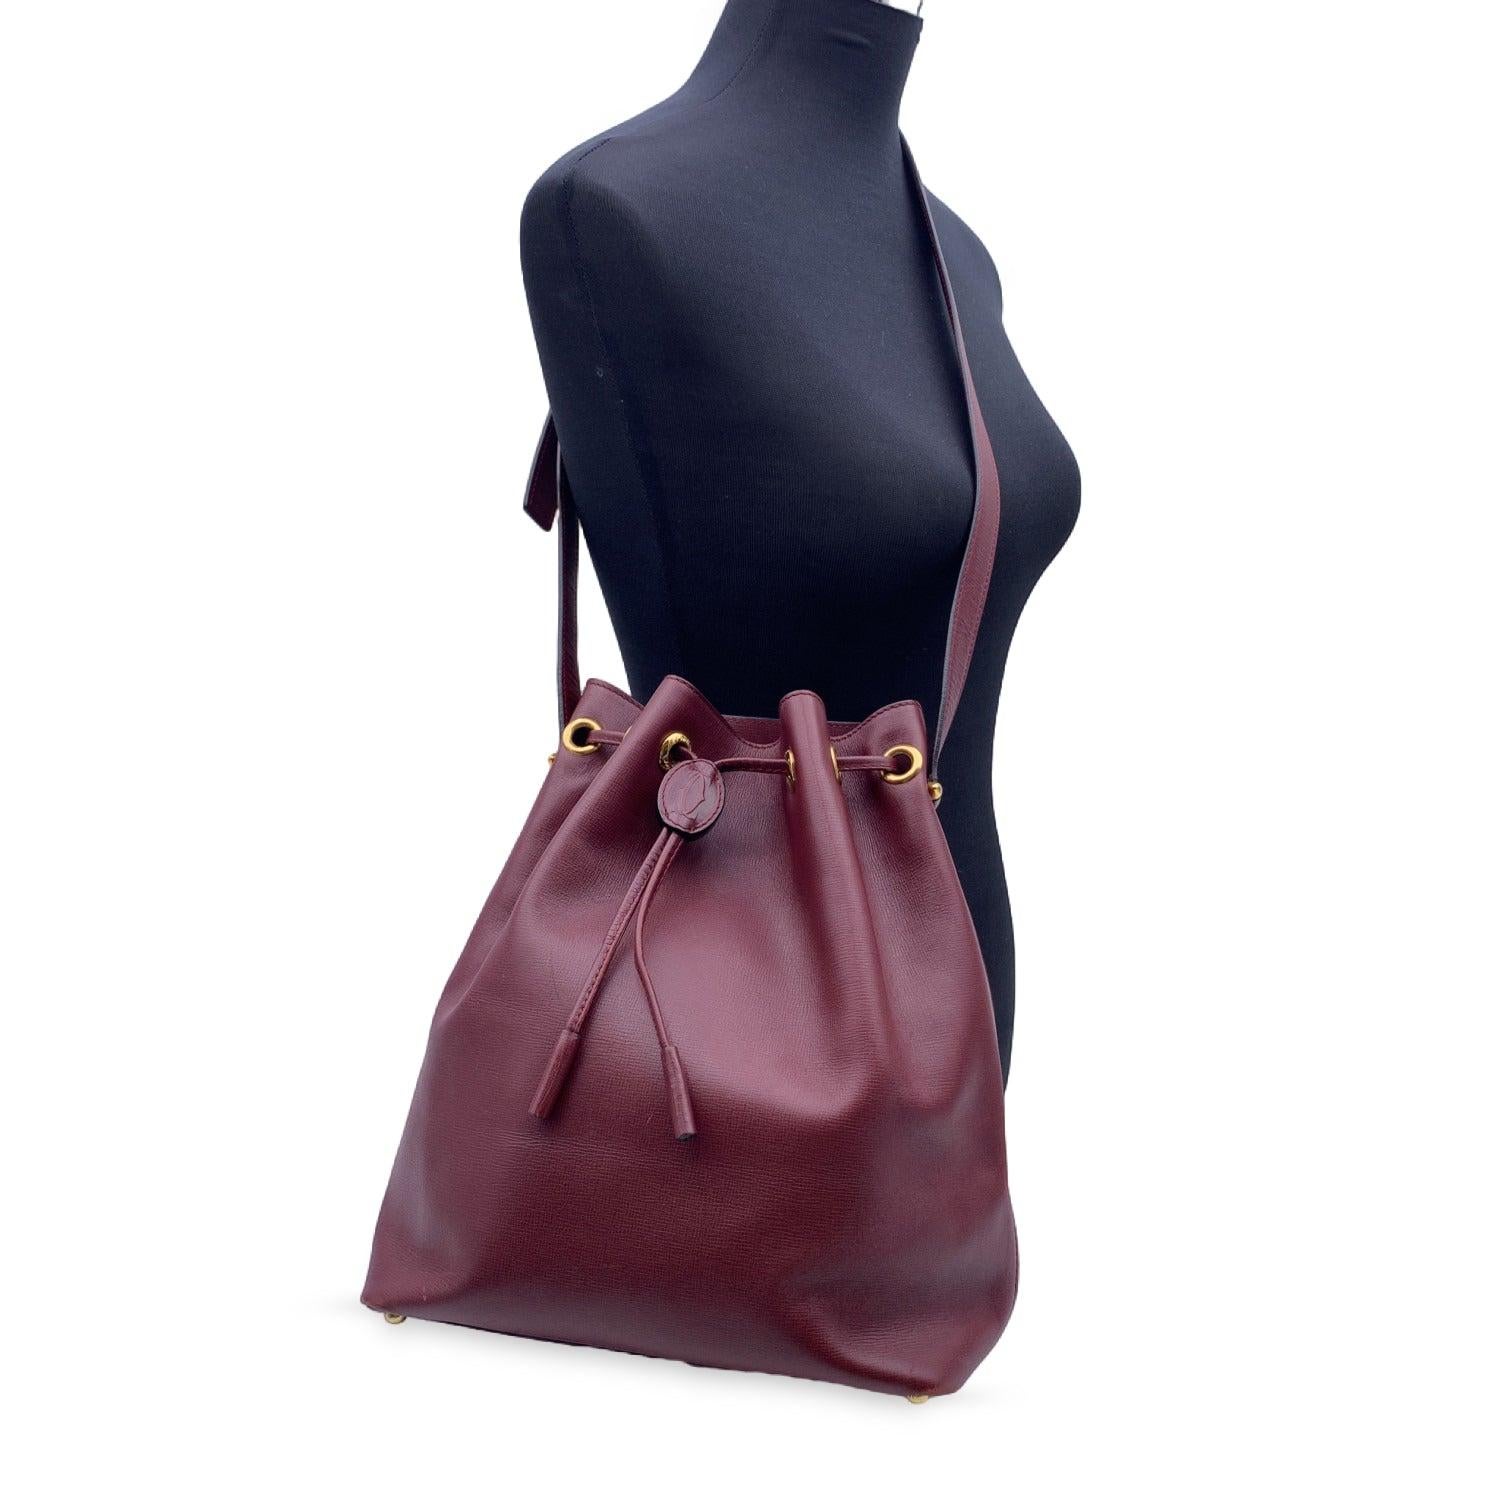 Cartier Vintage drawstring bucket in burgundy genuine leather. Cartier logo patch on the front. Gold metal hardware. Burgundy lining with Cartier logos. 1 side open pocket. Adjustable shoulder strap. 'Cartier Paris' embossed inside Condition A -